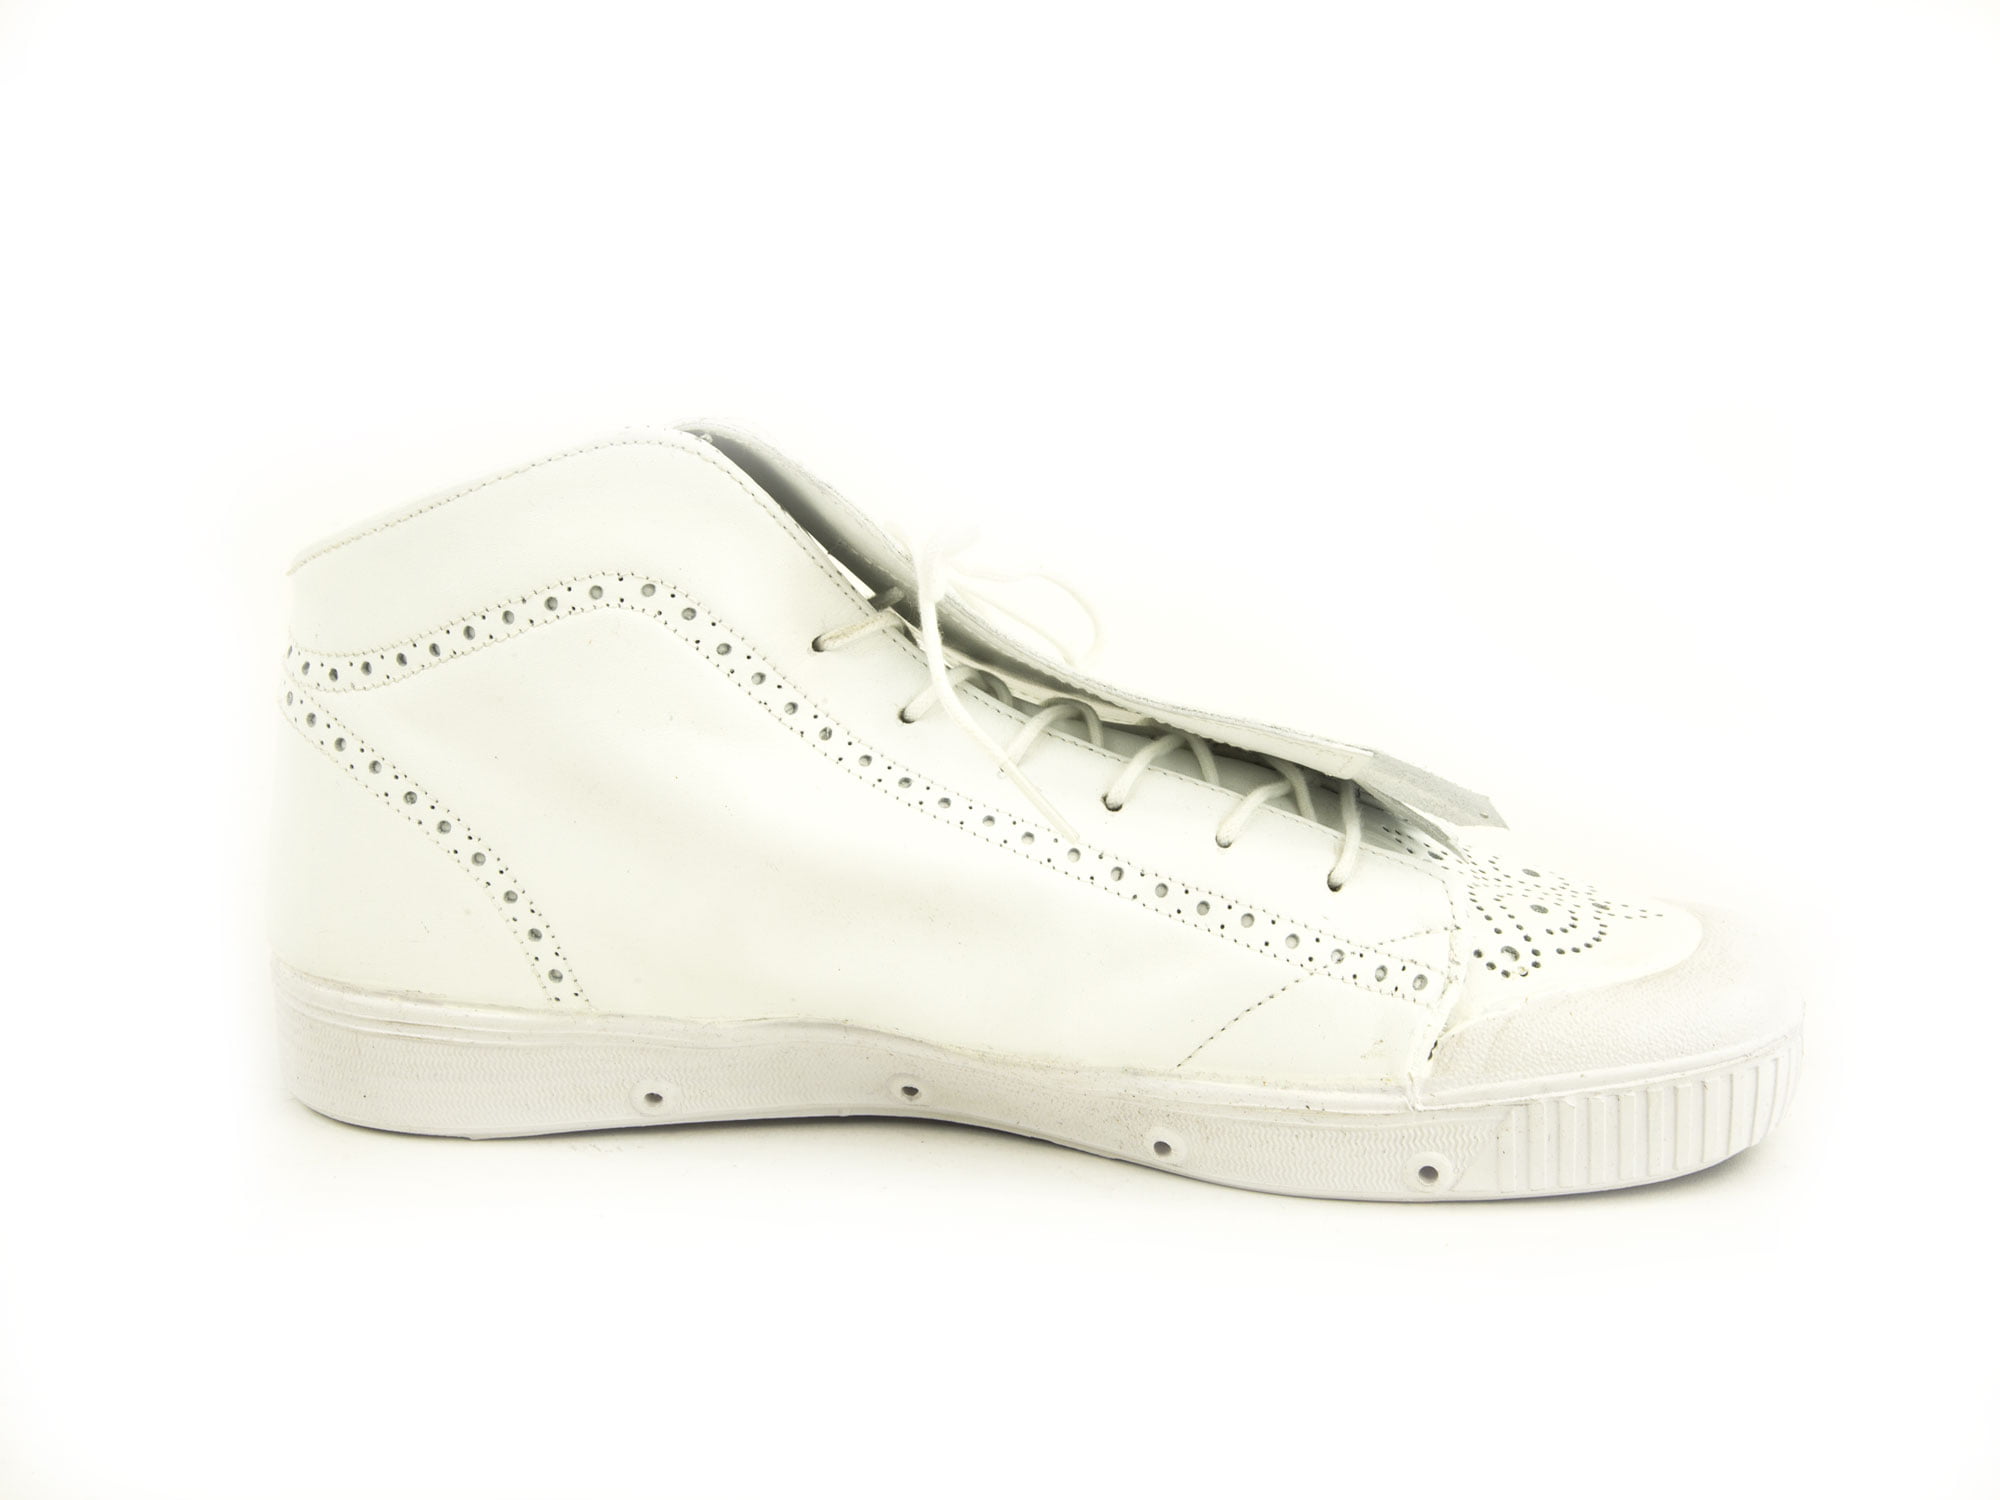 Spring Court - Spring Court Men's Nappa Leather B2 Birdie M Sneakers ...